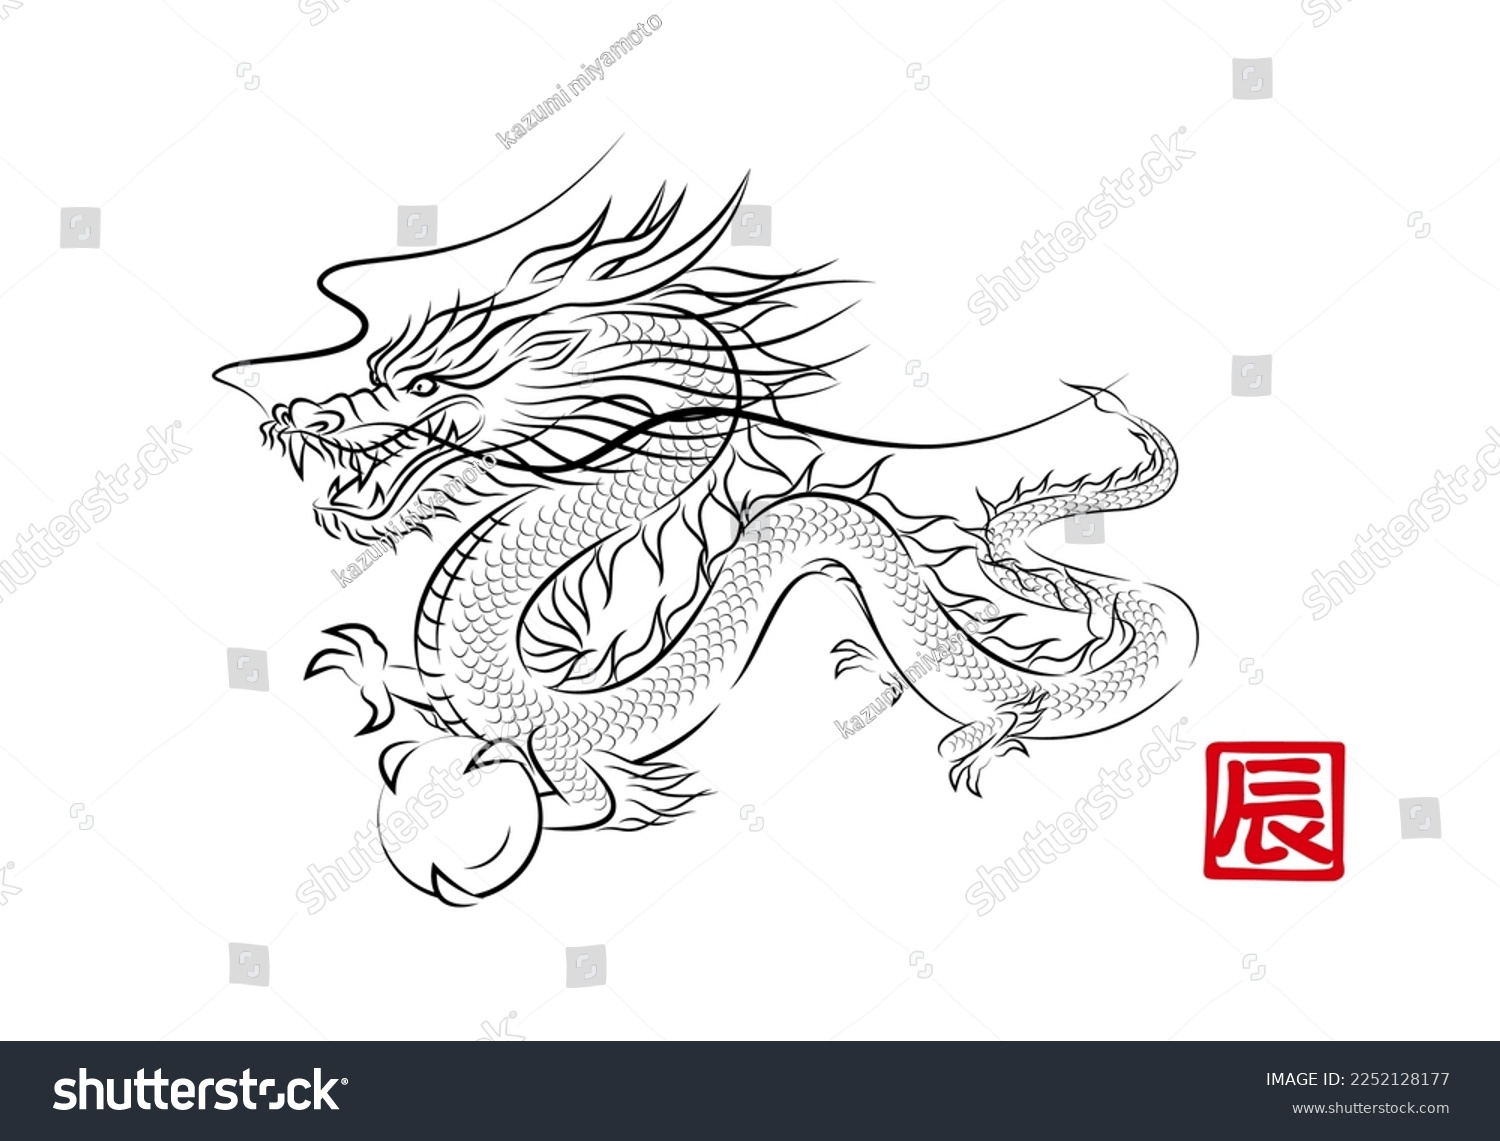 SVG of Stylish ink painting style illustration of a divine dragon flying with a dragon ball. Year of the Dragon New Year card material vector.
辰 means 